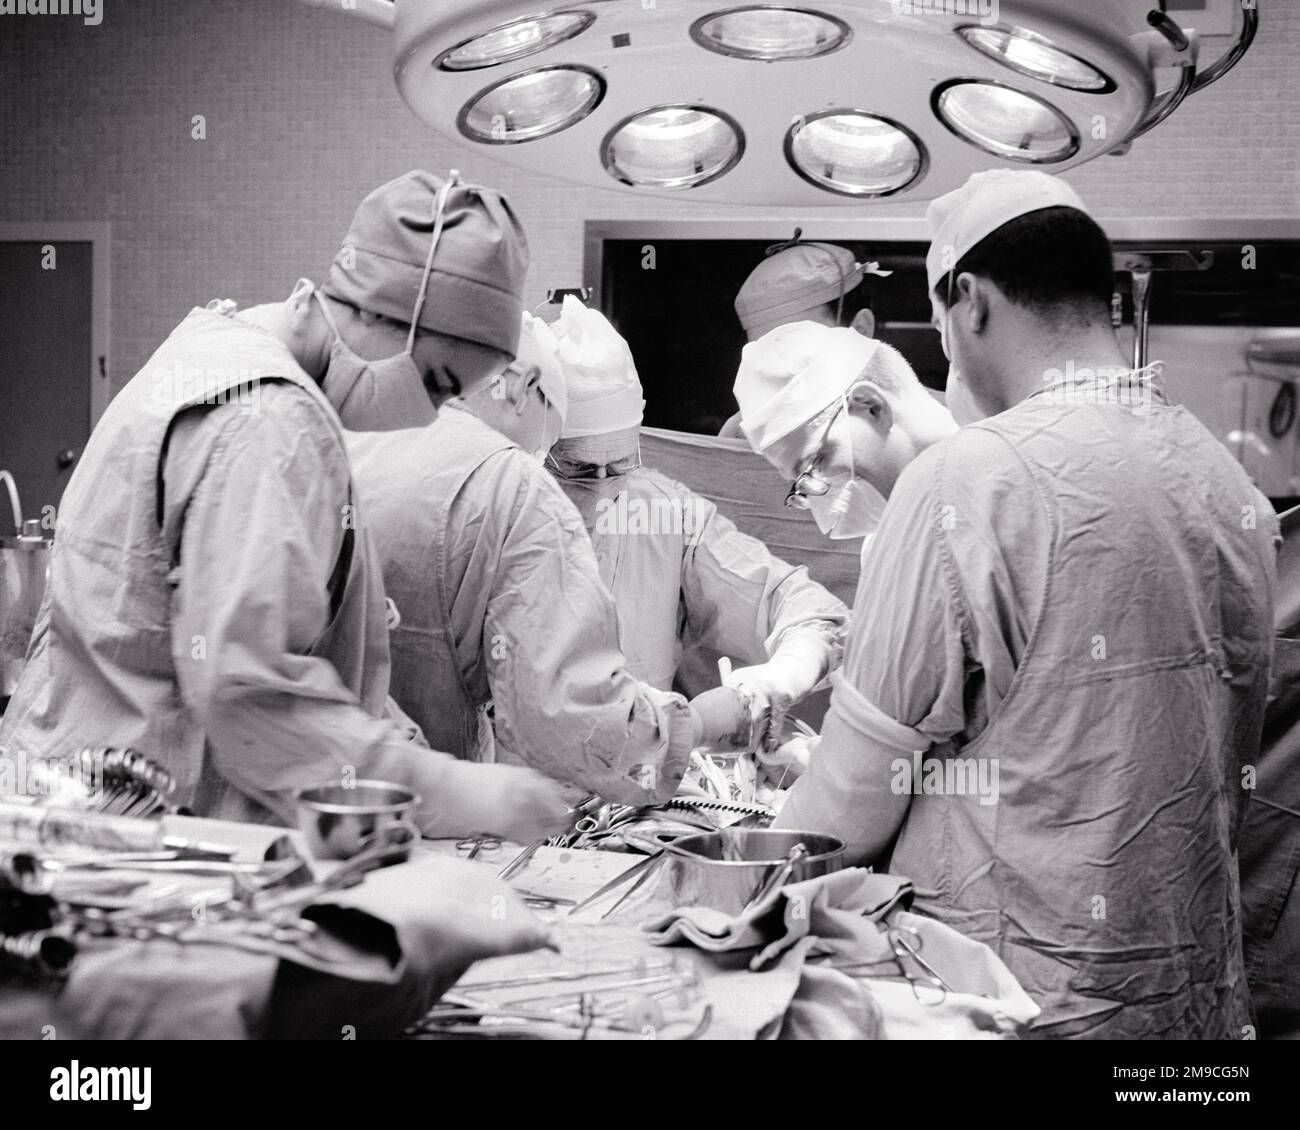 1960s DOCTORS SURGEONS NURSES IN OR STERILE CAPPED MASKED AND GOWNED PERFORMING A SURGERY UNDER HOSPITAL LIGHTING FIXTURE - m7817 HAR001 HARS OPERATING PROVIDER PROVIDERS PRACTITIONERS STERILE HEALING AND SURGICAL CAREERS PHYSICIANS SURGEONS LABOR OPERATING ROOM HEALTH CARE CAPPED EMPLOYMENT OCCUPATIONS SURGEON KCAU HEALER HOSPITALS OPERATION PHYSICIAN PRACTITIONER FACILITY INFRASTRUCTURE EMPLOYEE FACILITIES MASKED PROFESSIONALS BLACK AND WHITE CAUCASIAN ETHNICITY FIXTURE HAR001 LABORING OLD FASHIONED Stock Photo